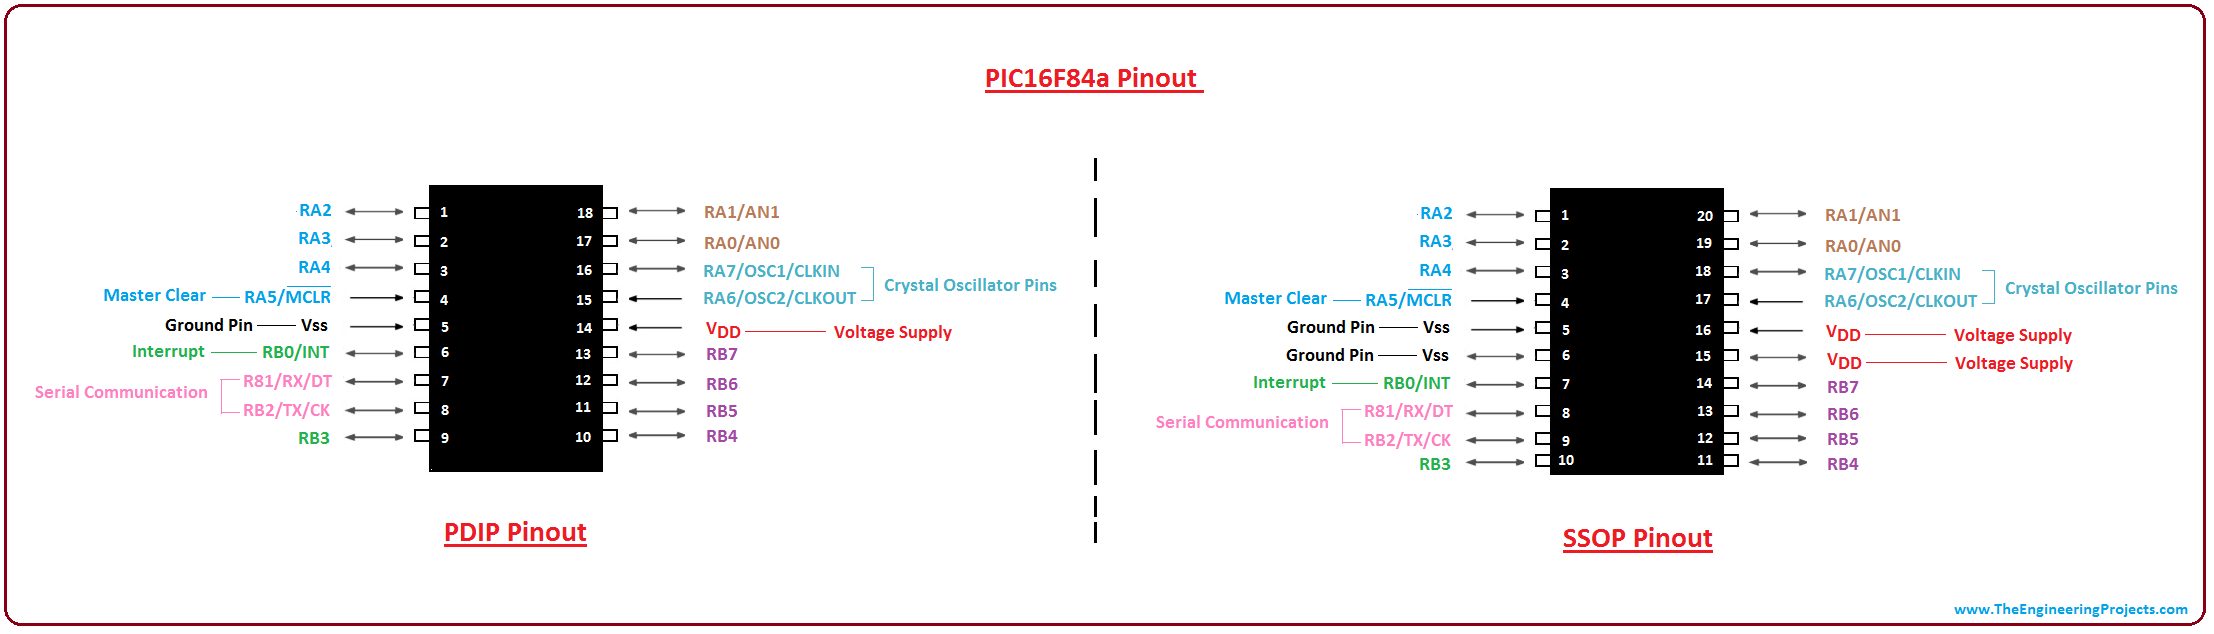 introduction to pic16f84a, pic16f84a pinout, pic16f84a features, pic16f84a applications, pic16f84a memory layout